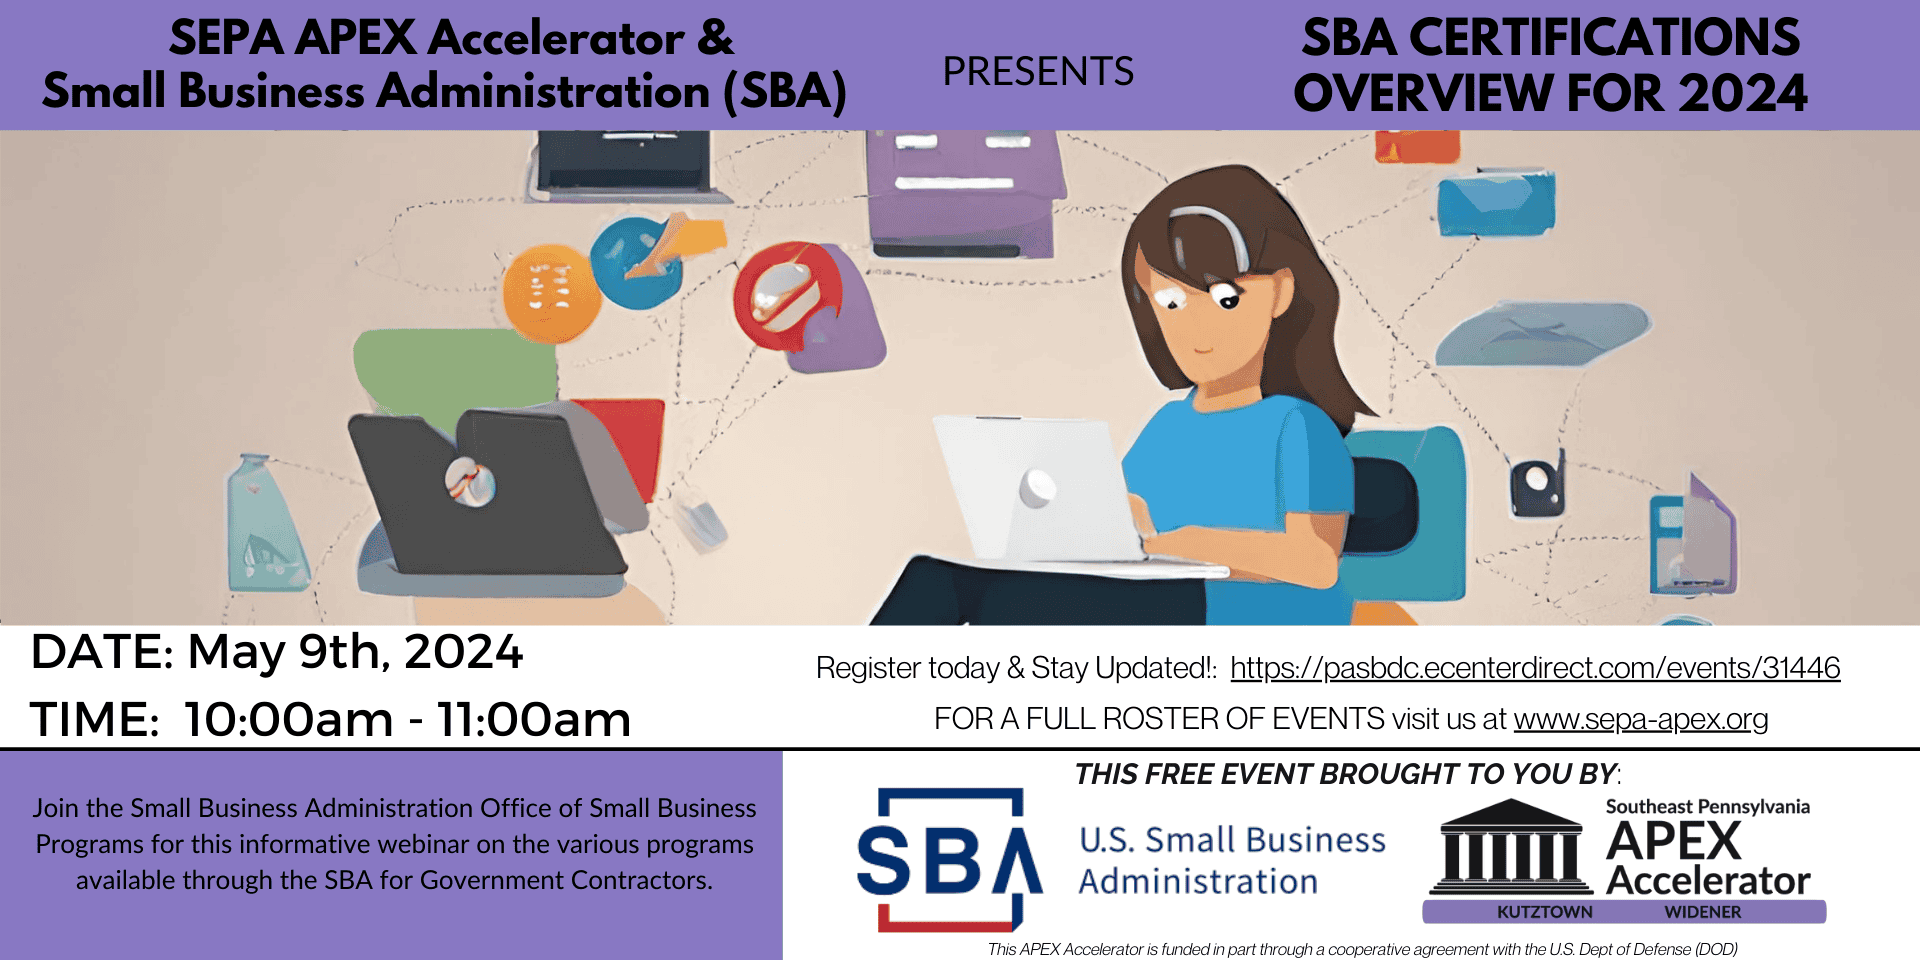 SBA Certifications Overview for 2024